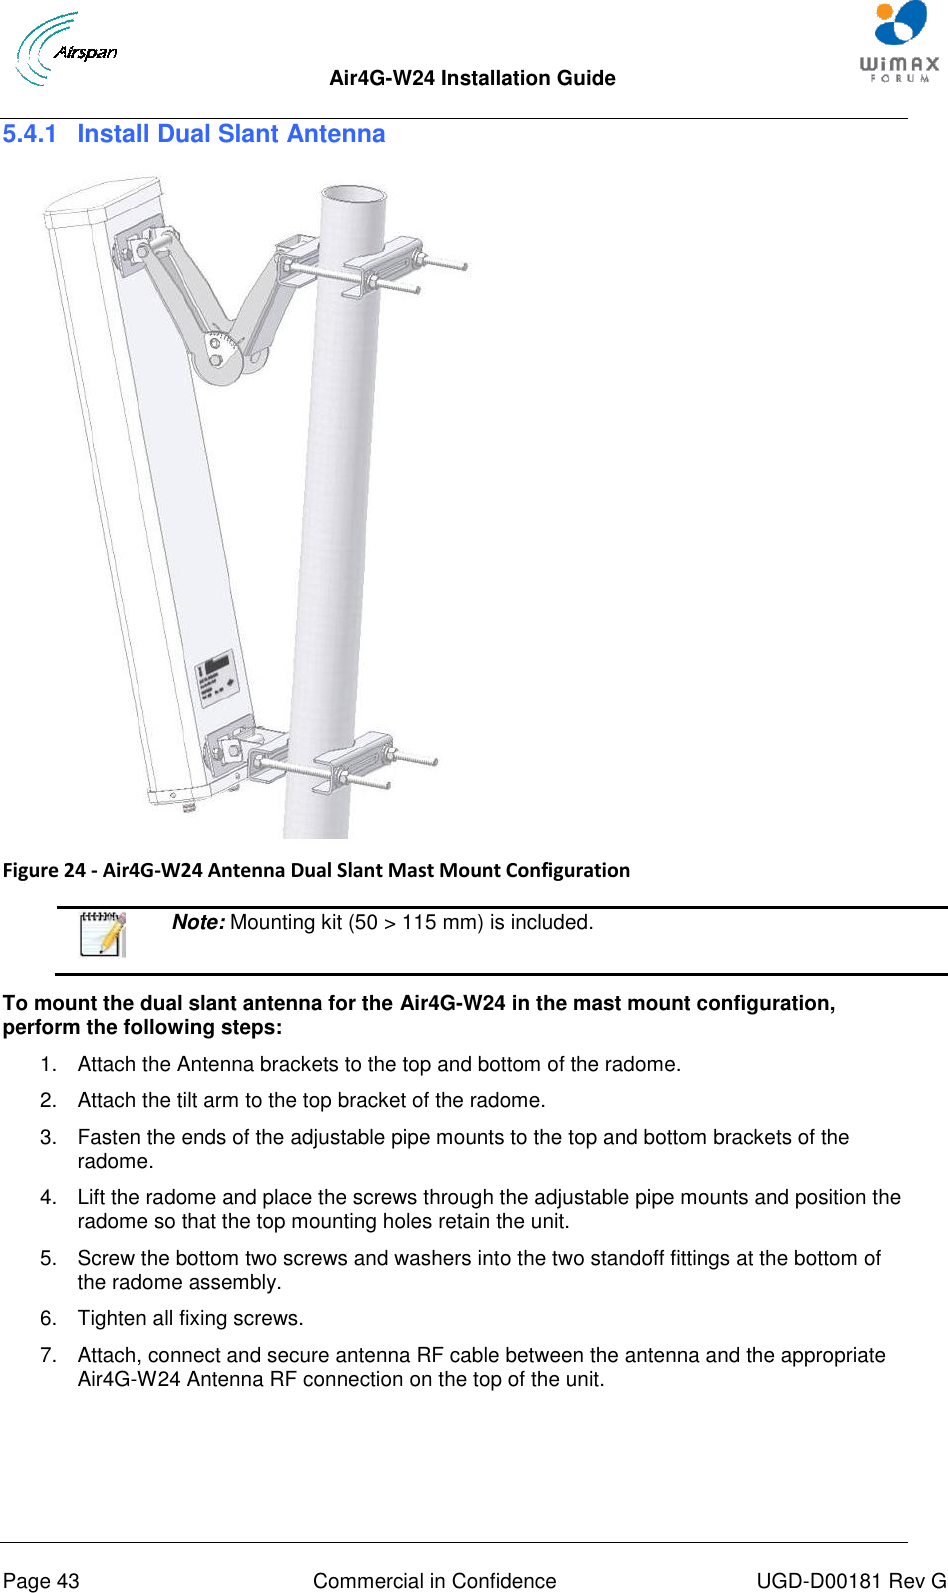  Air4G-W24 Installation Guide       Page 43  Commercial in Confidence  UGD-D00181 Rev G 5.4.1  Install Dual Slant Antenna   Figure 24 - Air4G-W24 Antenna Dual Slant Mast Mount Configuration    Note: Mounting kit (50 &gt; 115 mm) is included.  To mount the dual slant antenna for the Air4G-W24 in the mast mount configuration, perform the following steps: 1.  Attach the Antenna brackets to the top and bottom of the radome.  2.  Attach the tilt arm to the top bracket of the radome. 3.  Fasten the ends of the adjustable pipe mounts to the top and bottom brackets of the radome. 4.  Lift the radome and place the screws through the adjustable pipe mounts and position the radome so that the top mounting holes retain the unit. 5.  Screw the bottom two screws and washers into the two standoff fittings at the bottom of the radome assembly. 6.  Tighten all fixing screws. 7.  Attach, connect and secure antenna RF cable between the antenna and the appropriate Air4G-W24 Antenna RF connection on the top of the unit.    